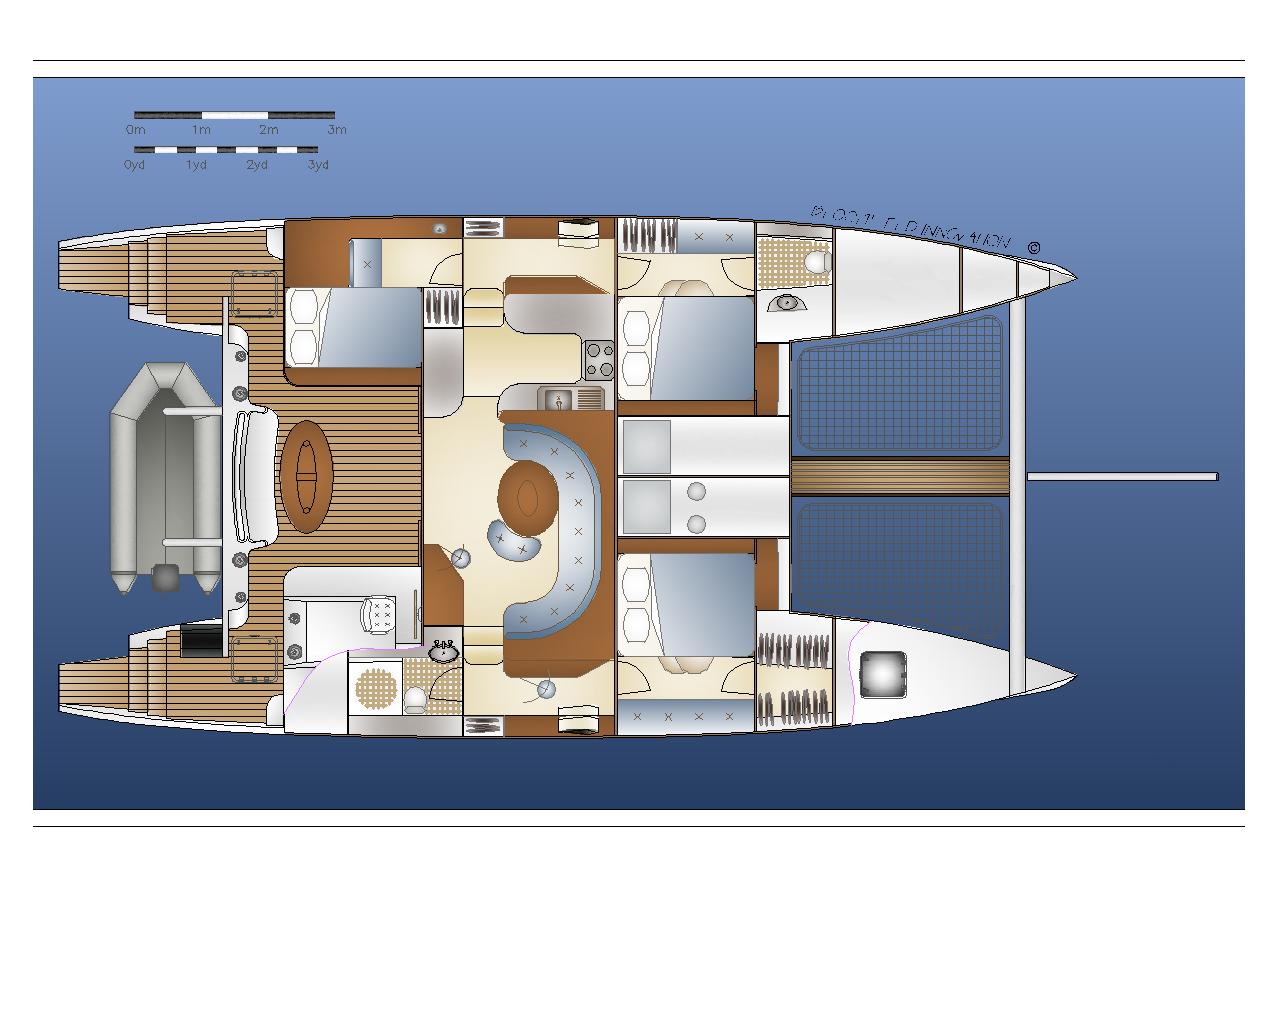  Building Plans | How To and DIY Building Plans Online Class - Boat